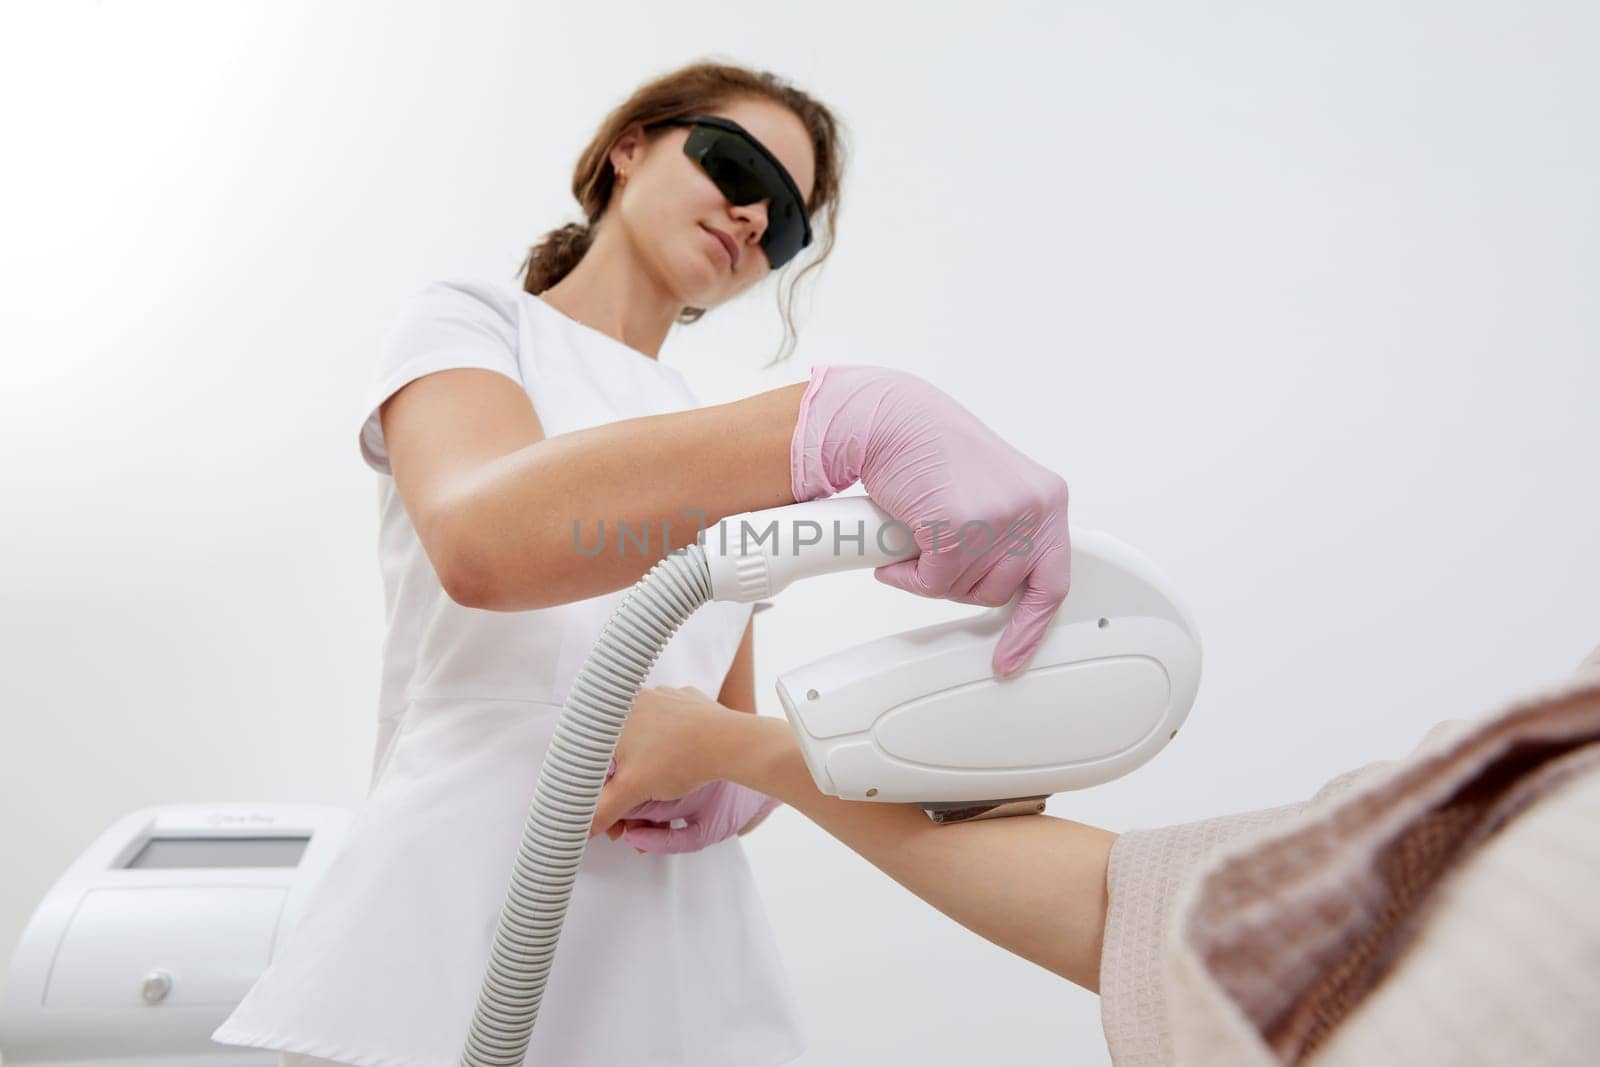 Young woman experiencing laser hair removal for her arms in a salon setting by Mariakray